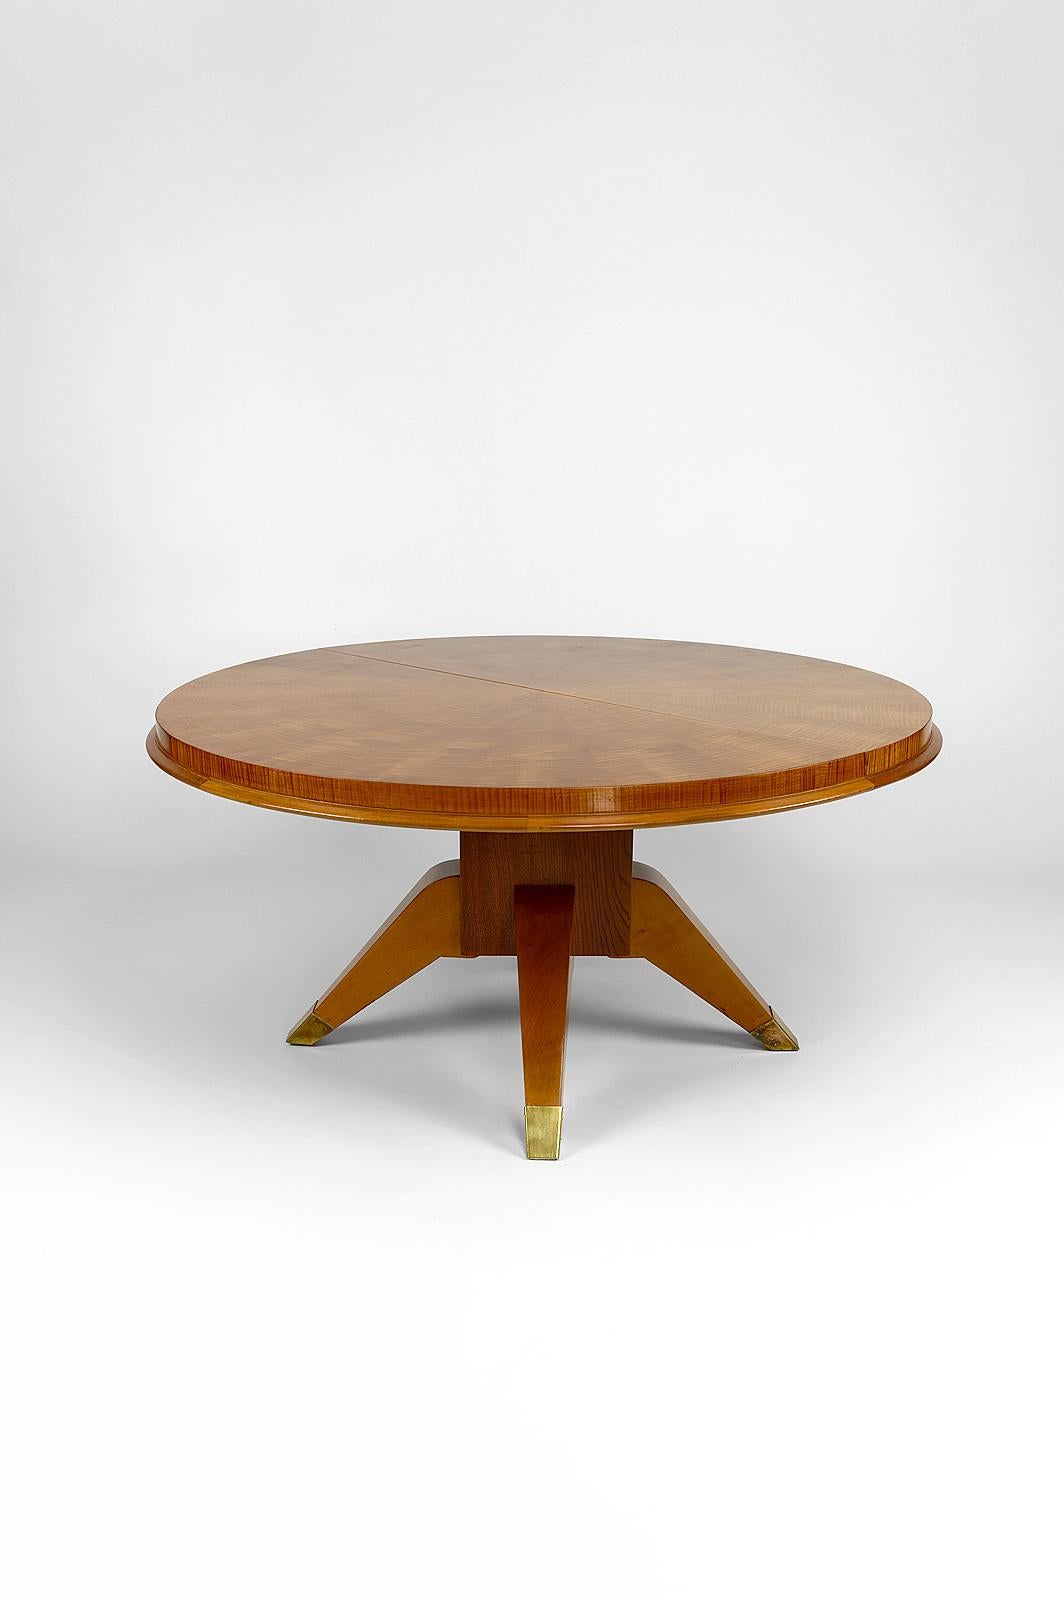 Elegant maple coffee table.

The quadripod base supports a circular top.
The feet are raised by brass plates.

Art Deco / Neo-Classical style, France, around 1940.

In the style of the productions of Lucien Rollin, Jallot, André Arbus, Jacques